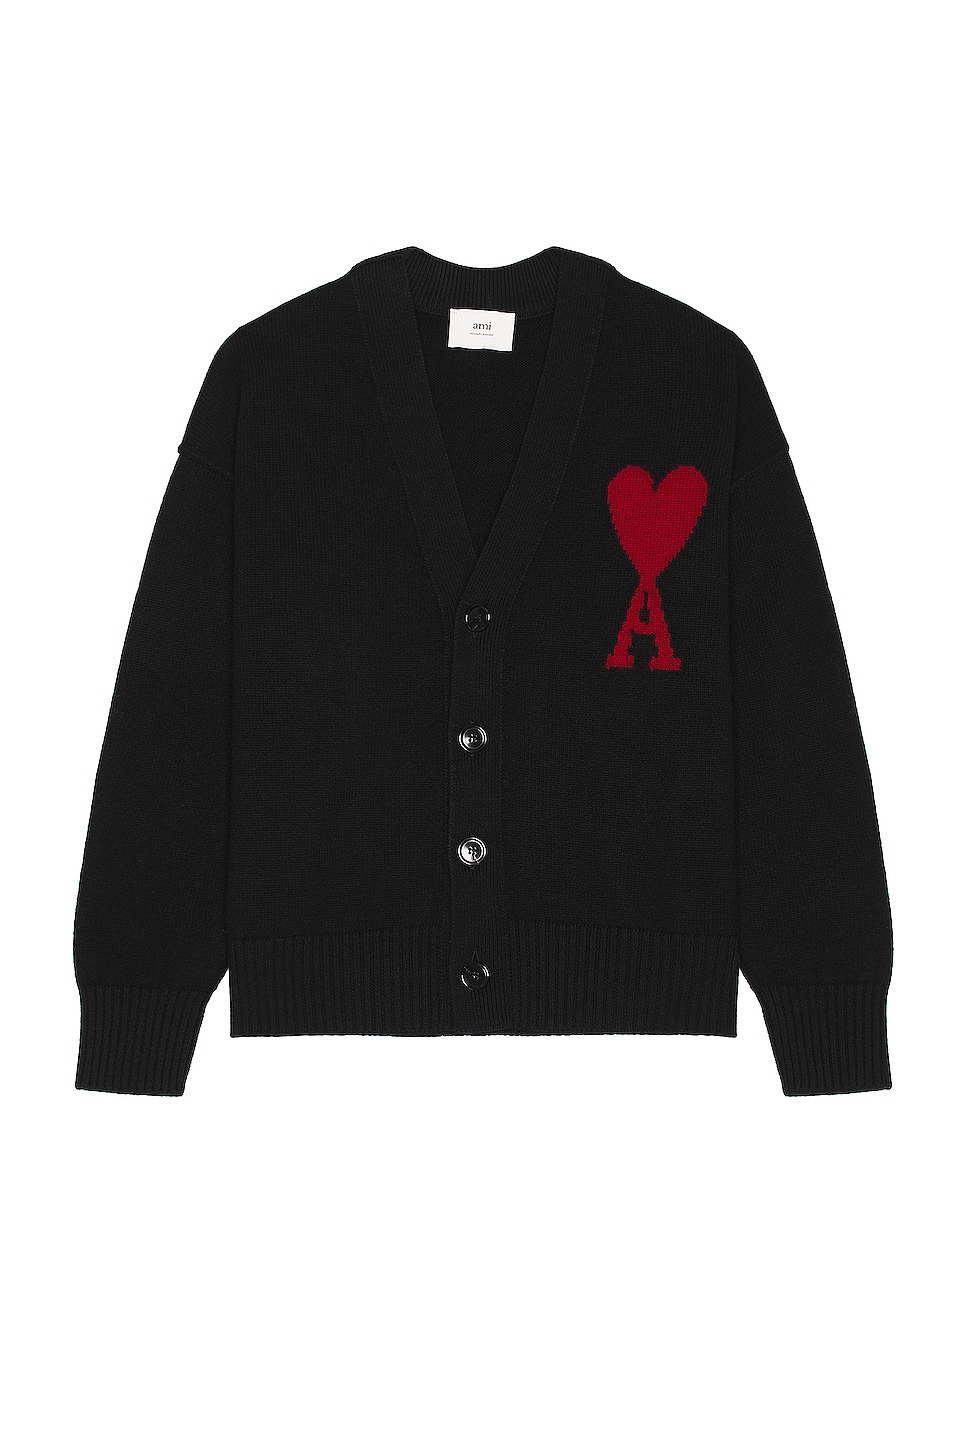 Red ADC Cardigan in Black